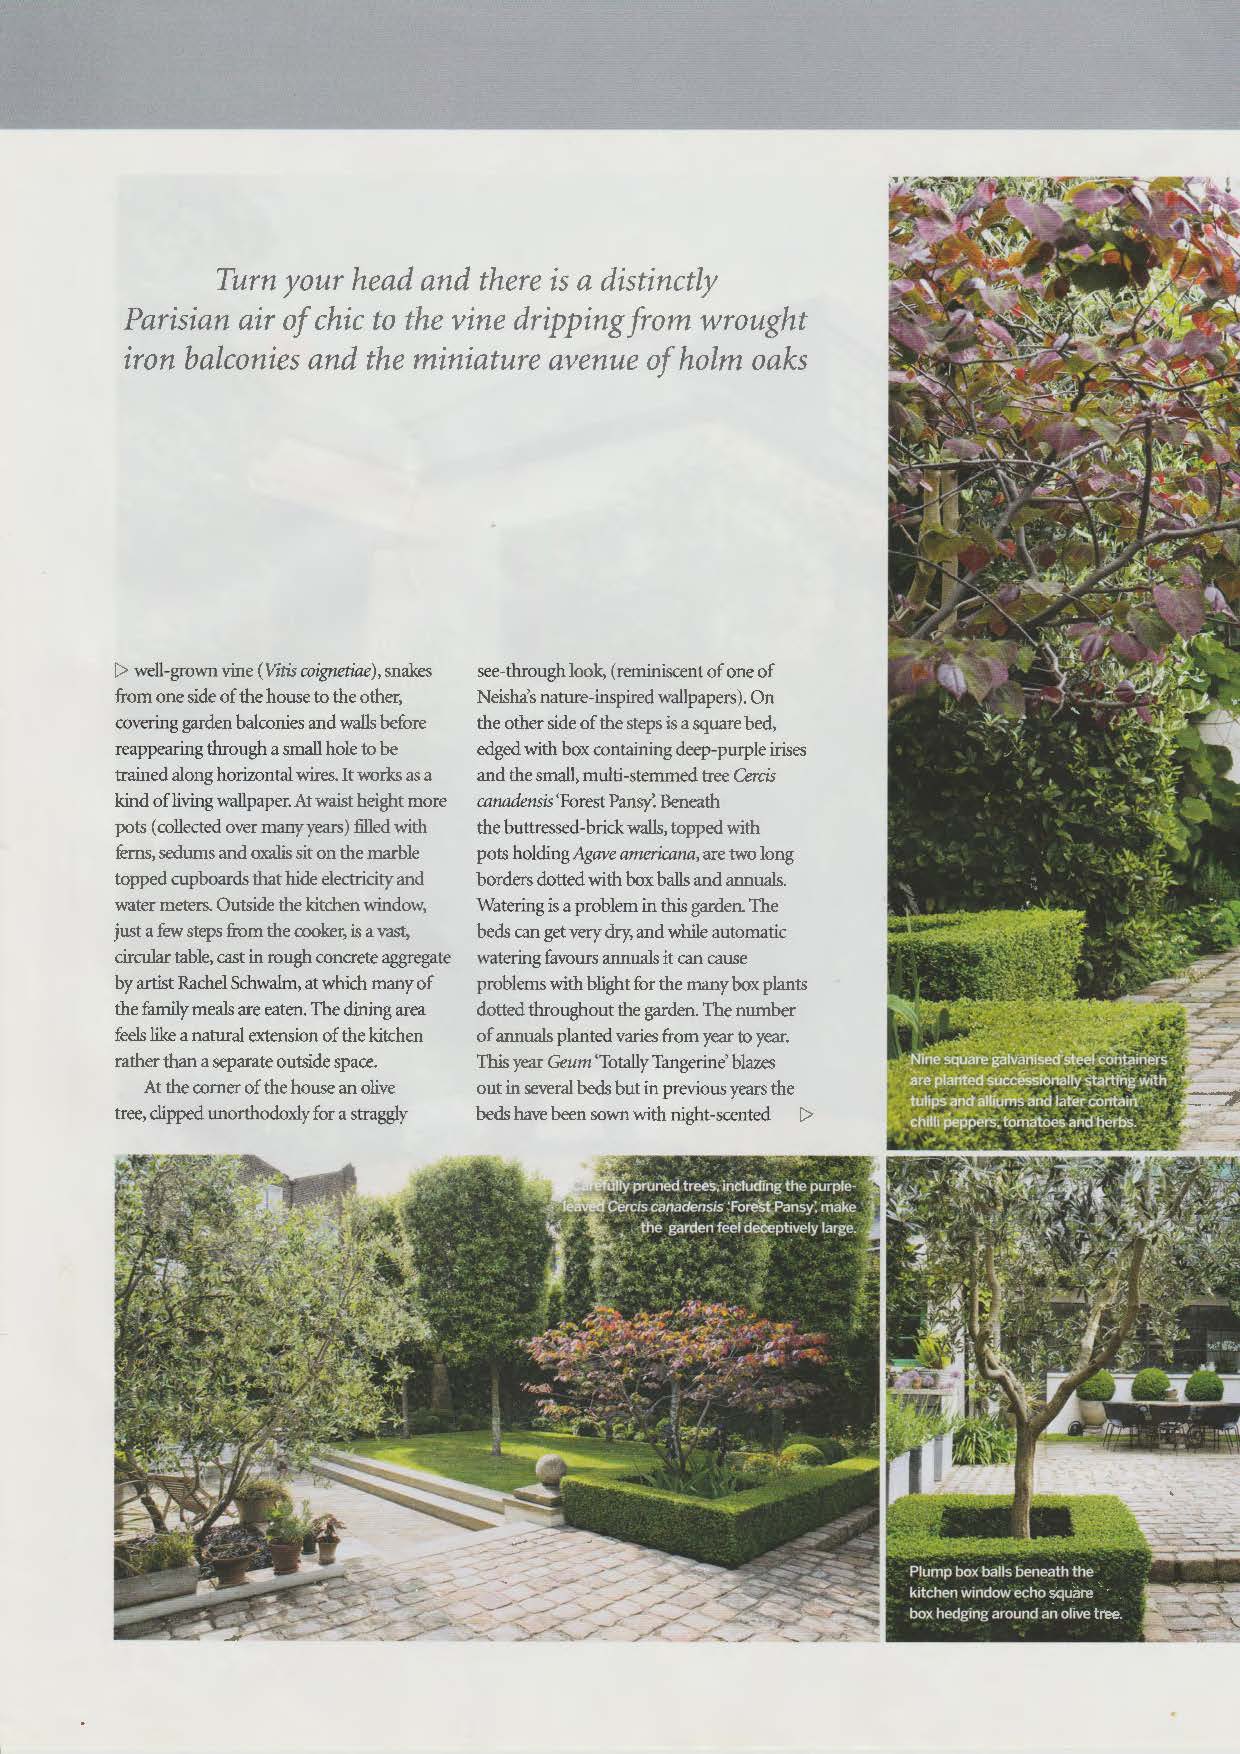 Gardens Illustrated 0814_Page_4.jpg